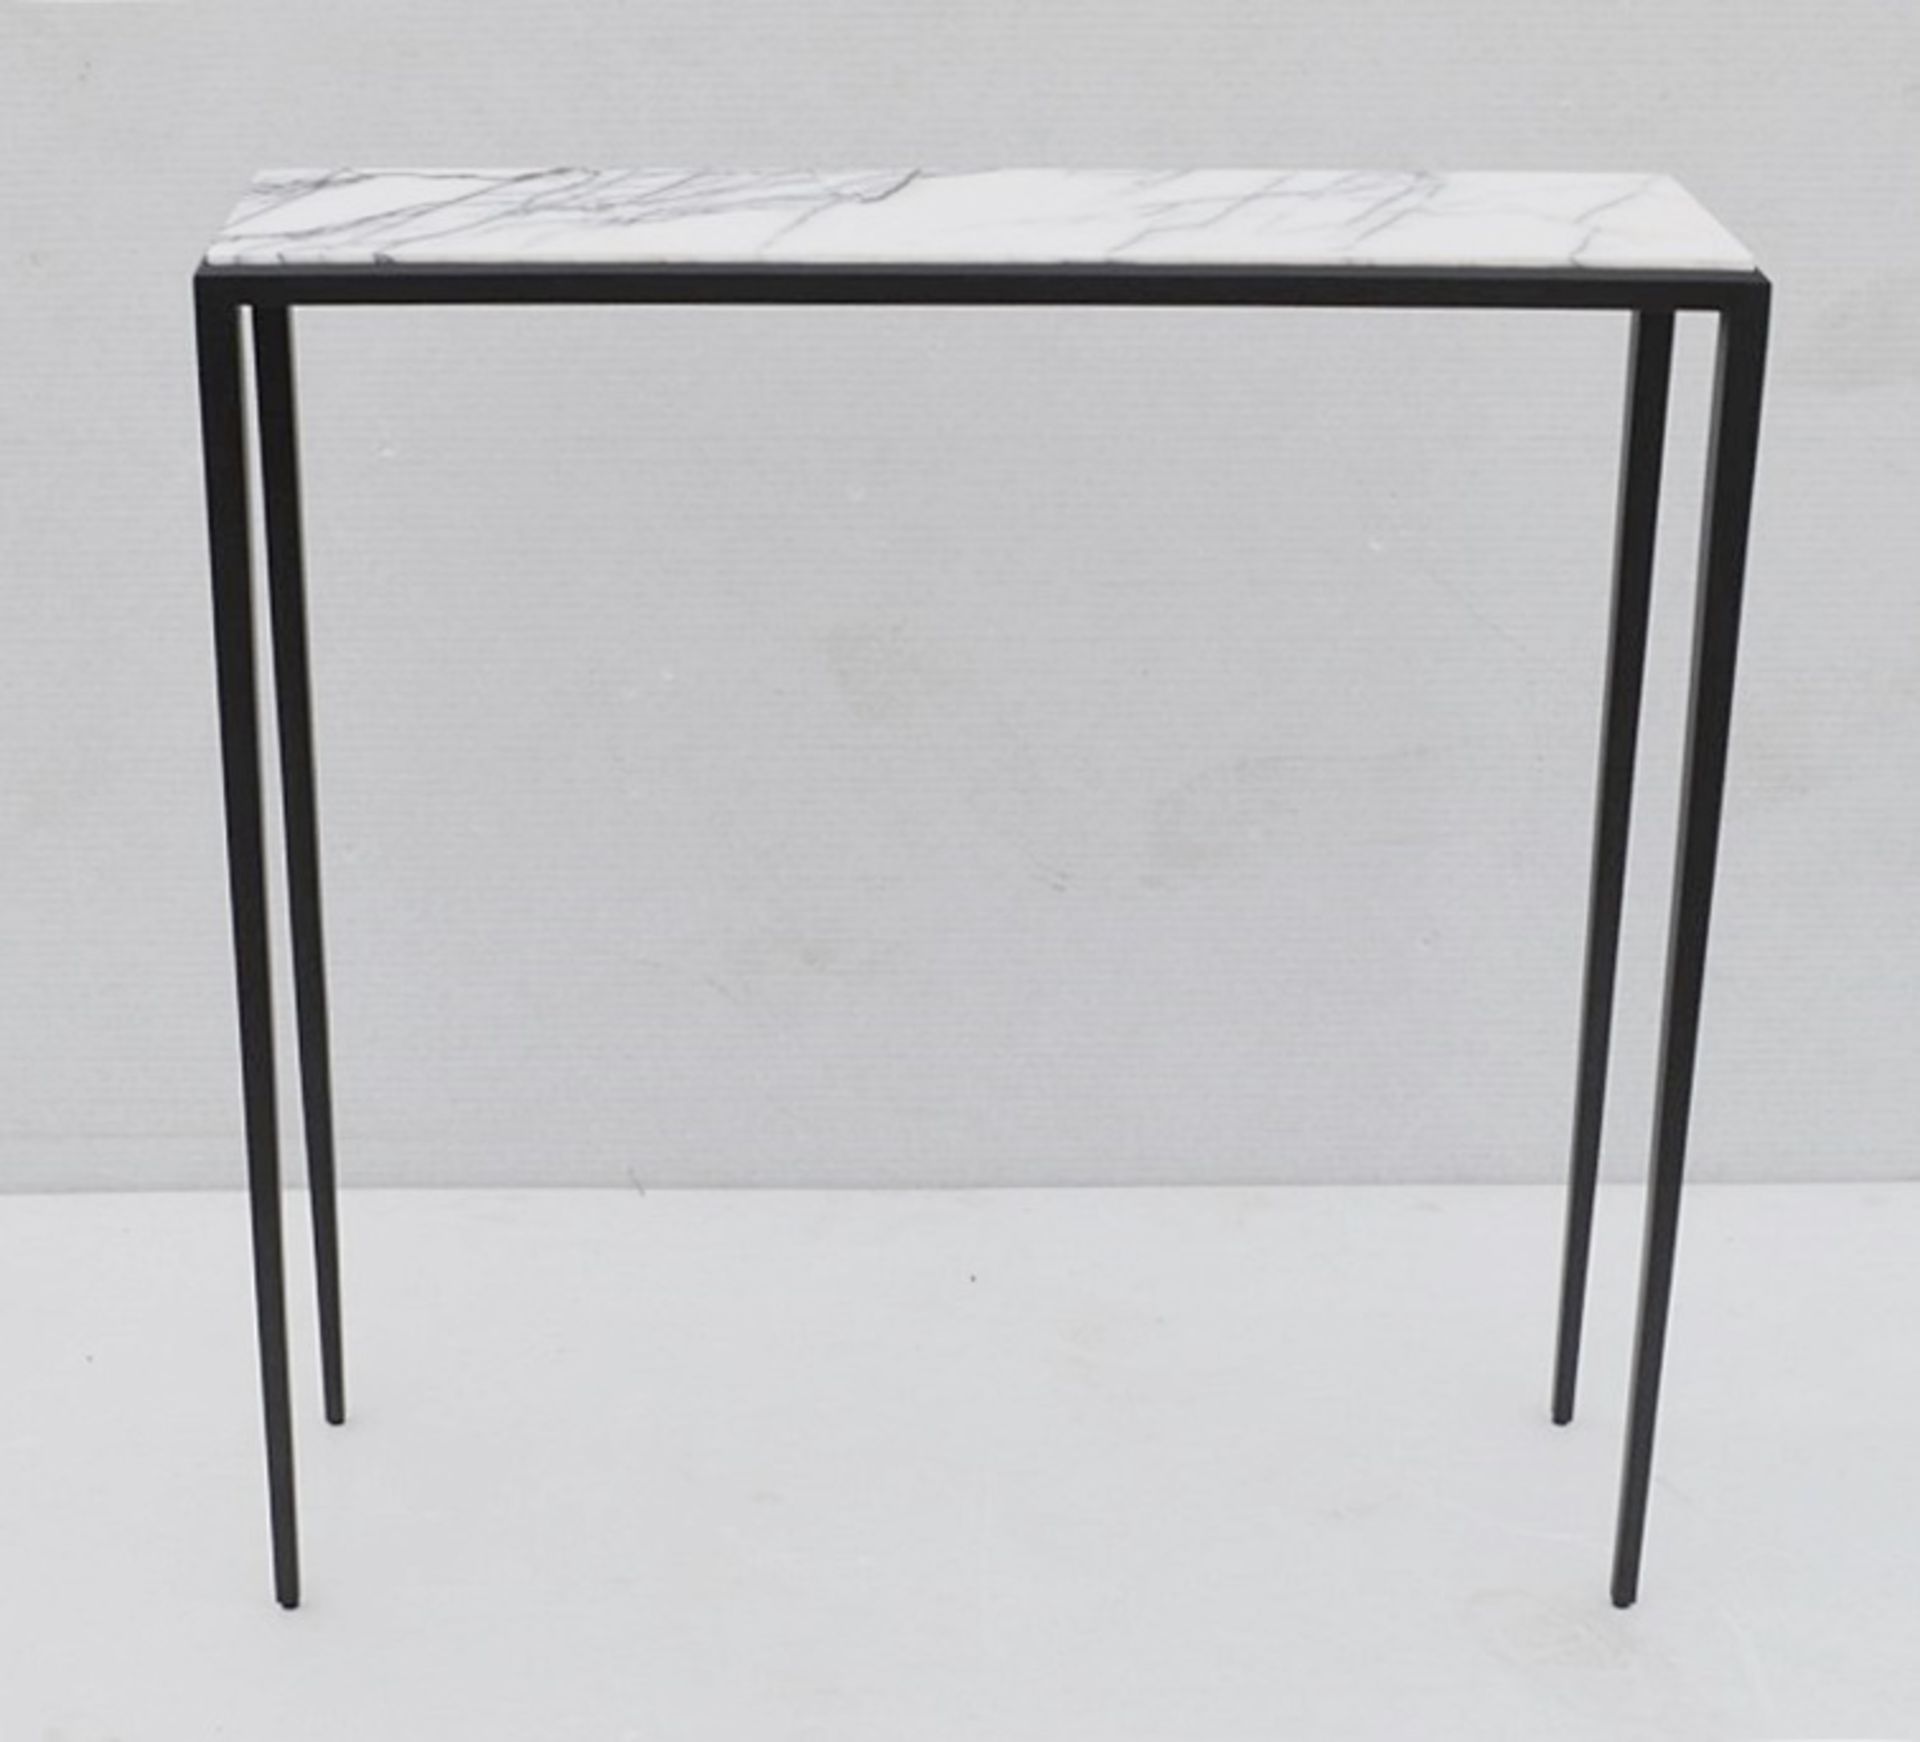 1 x EICHHOLTZ 'Henley' Designer Console Table With A Bronze Finish & Bianco Marble Top - RRP £1,649 - Image 3 of 8